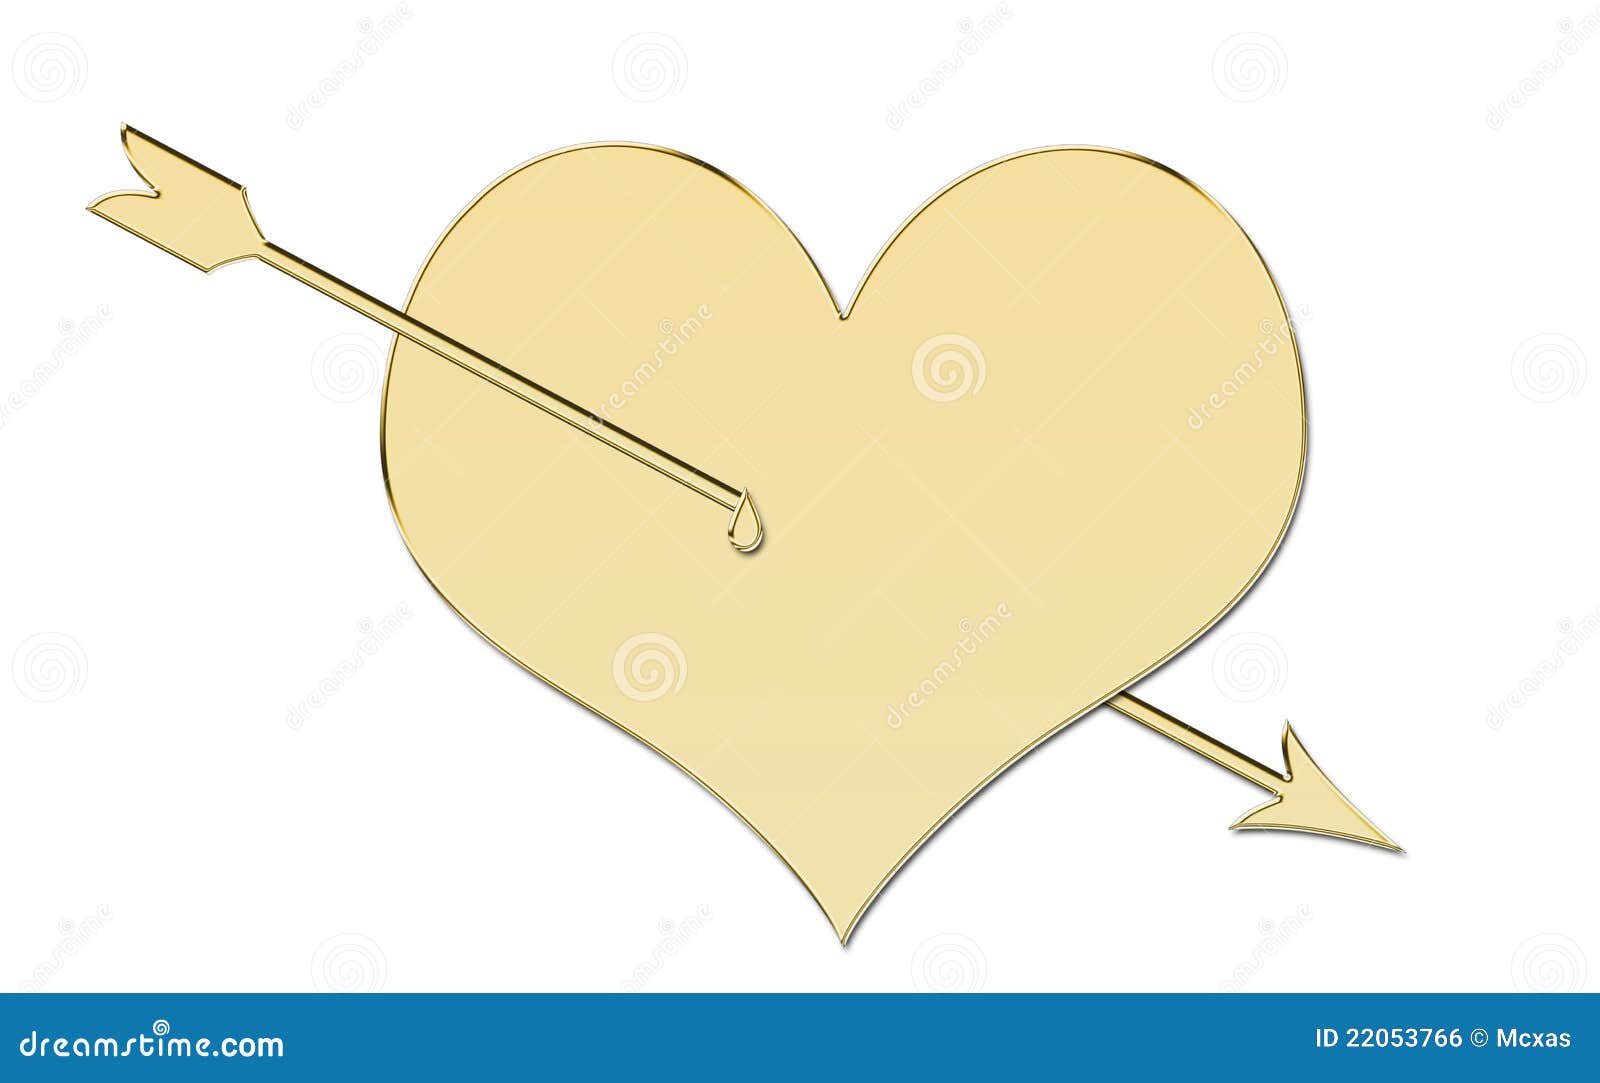 heart of gold with arrow